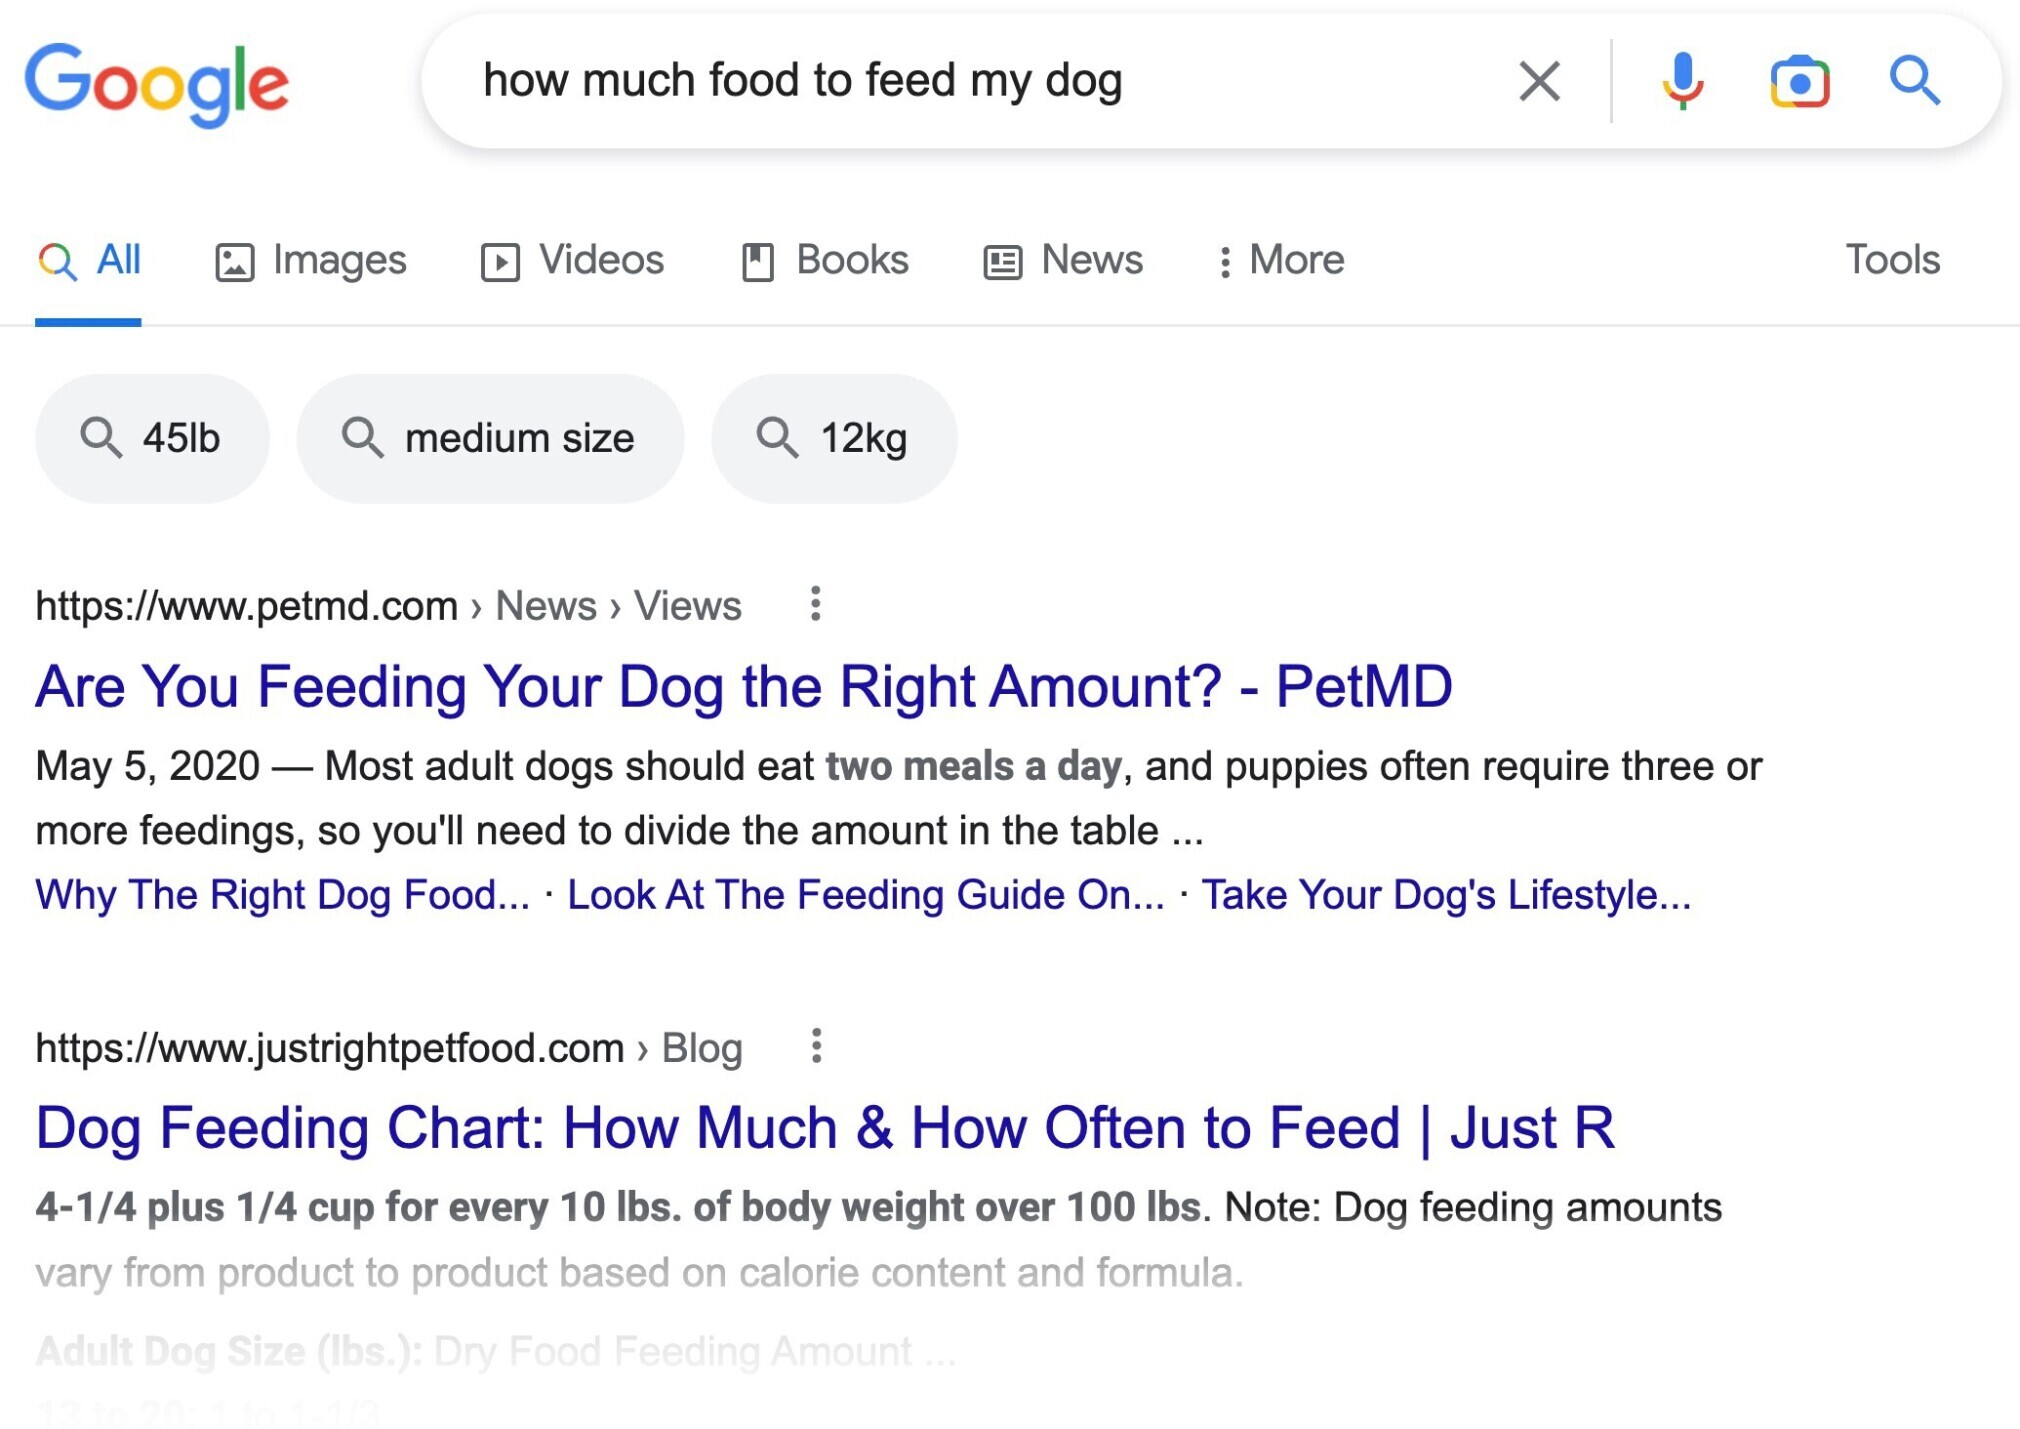 SERP for the keyword "how much food to feed by dog"